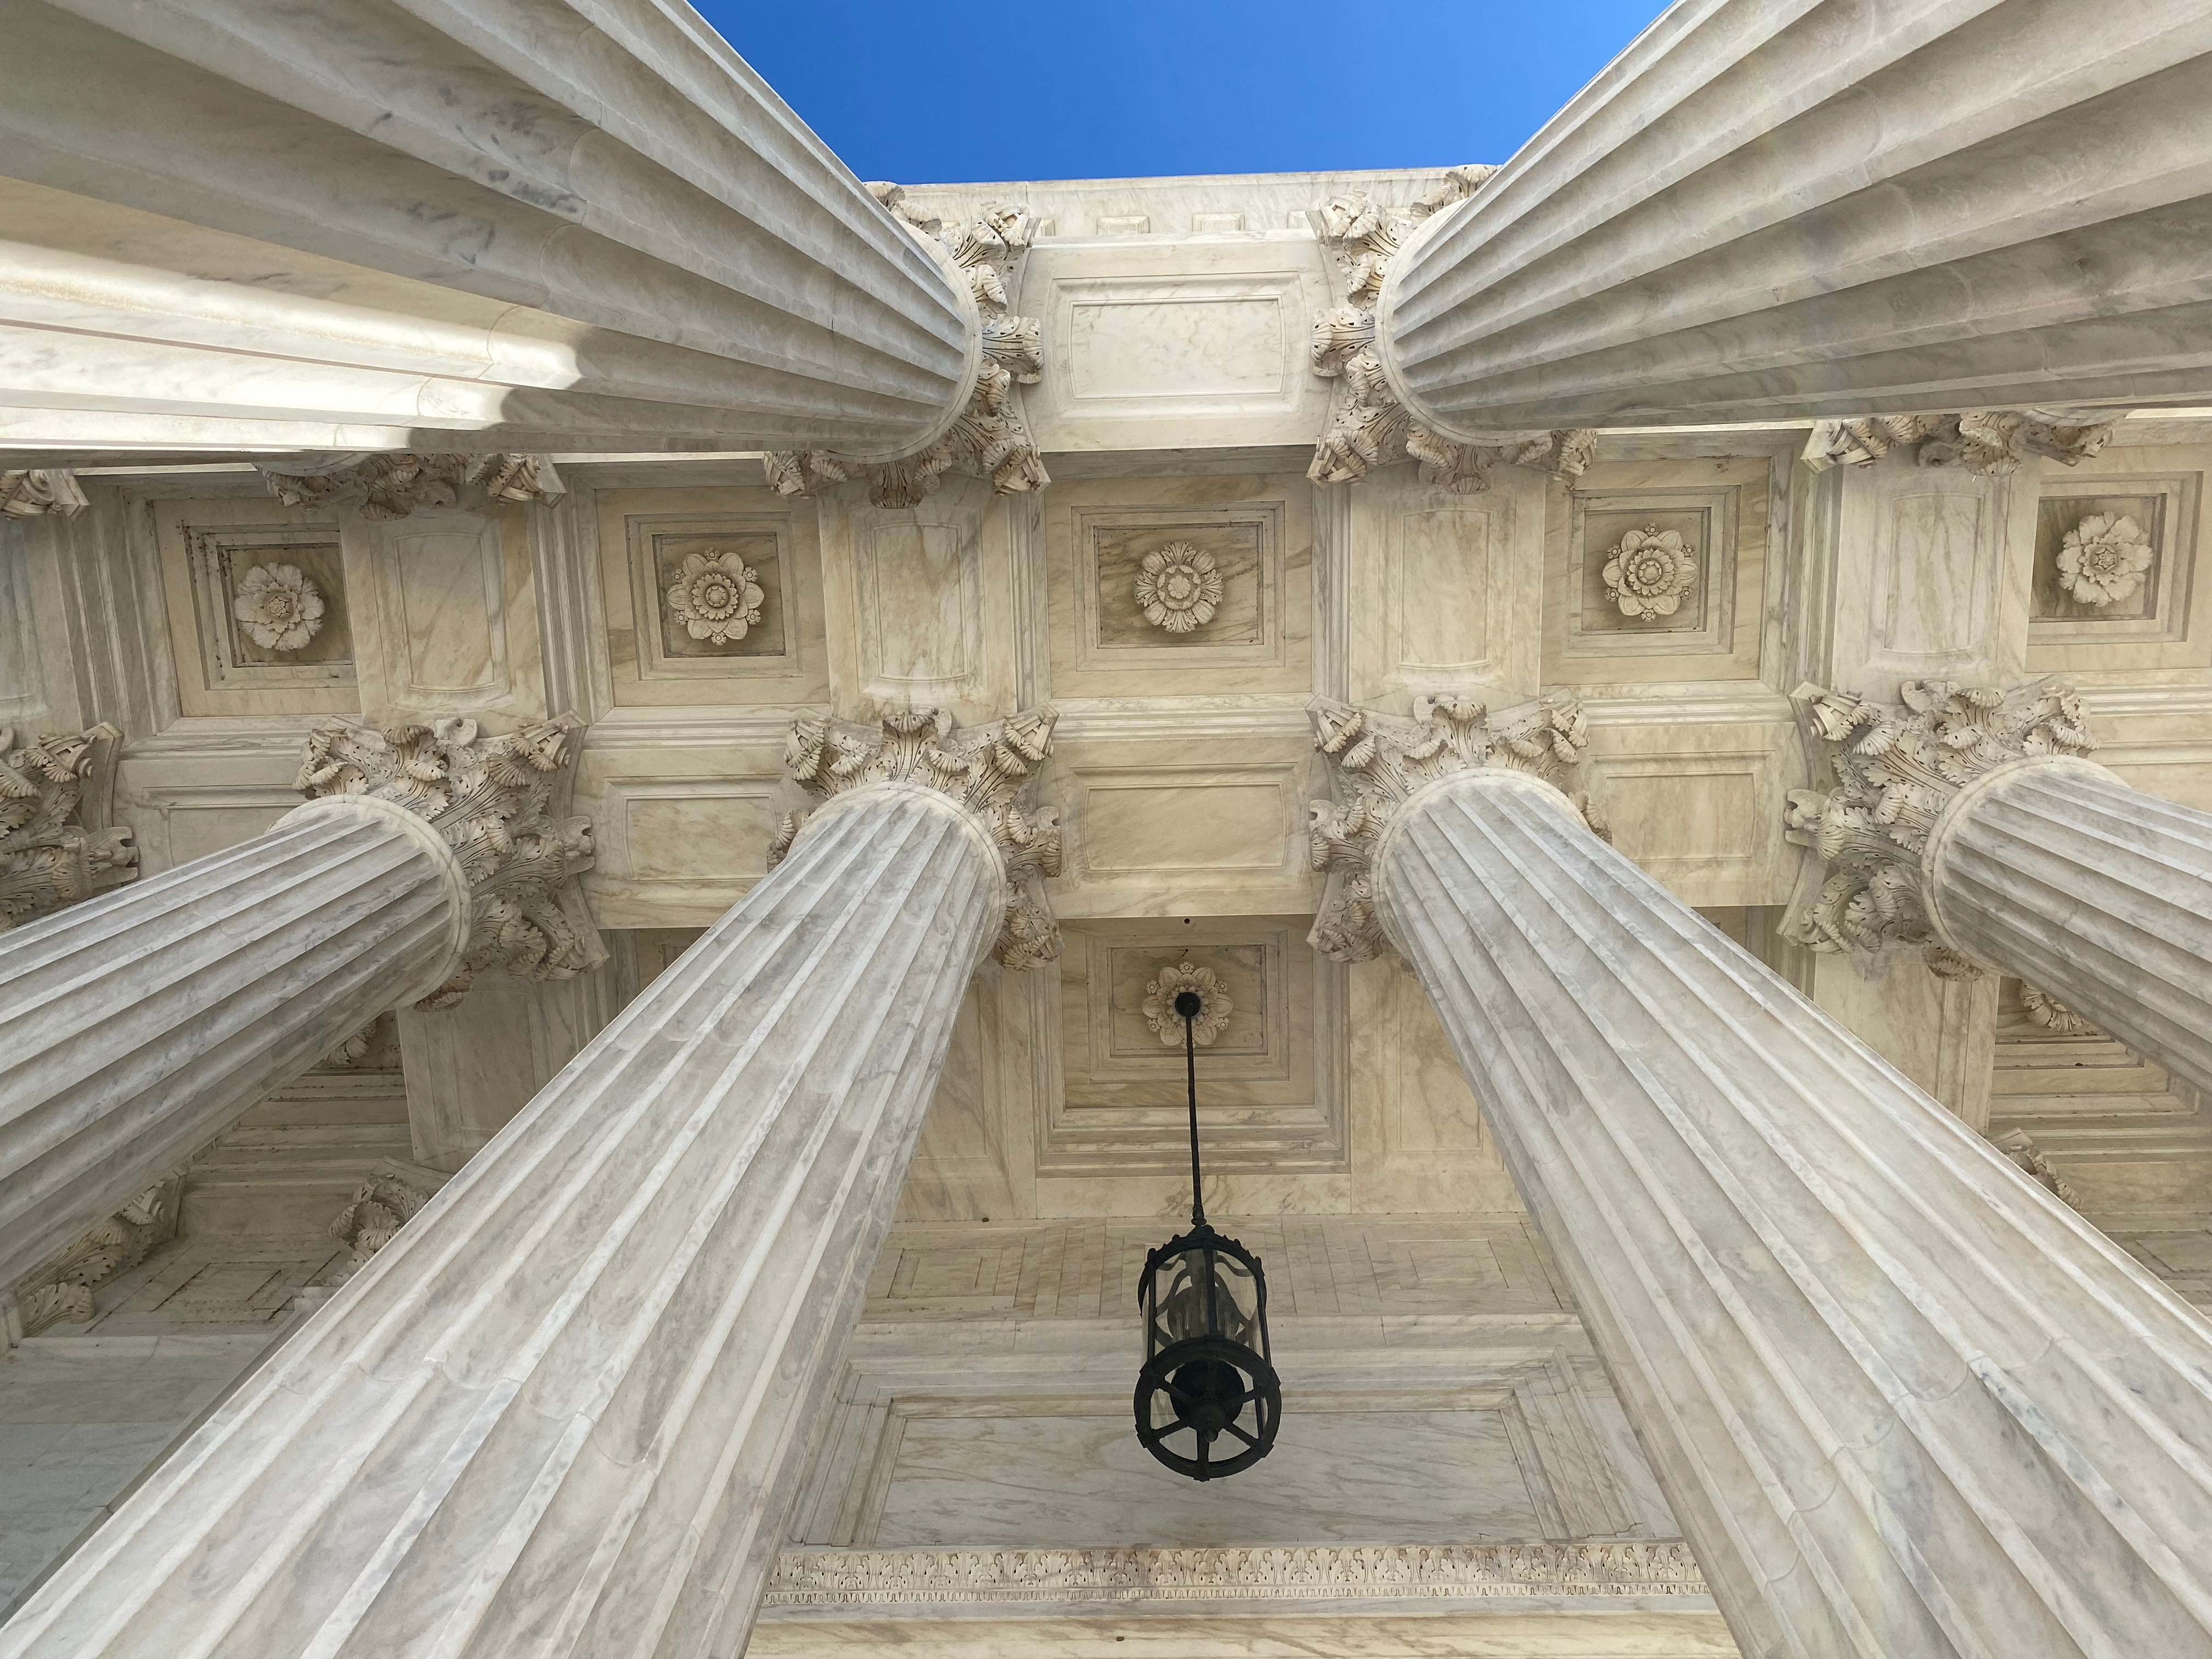 The ceiling of the U.S. Supreme Court building's portico is seen in Washington